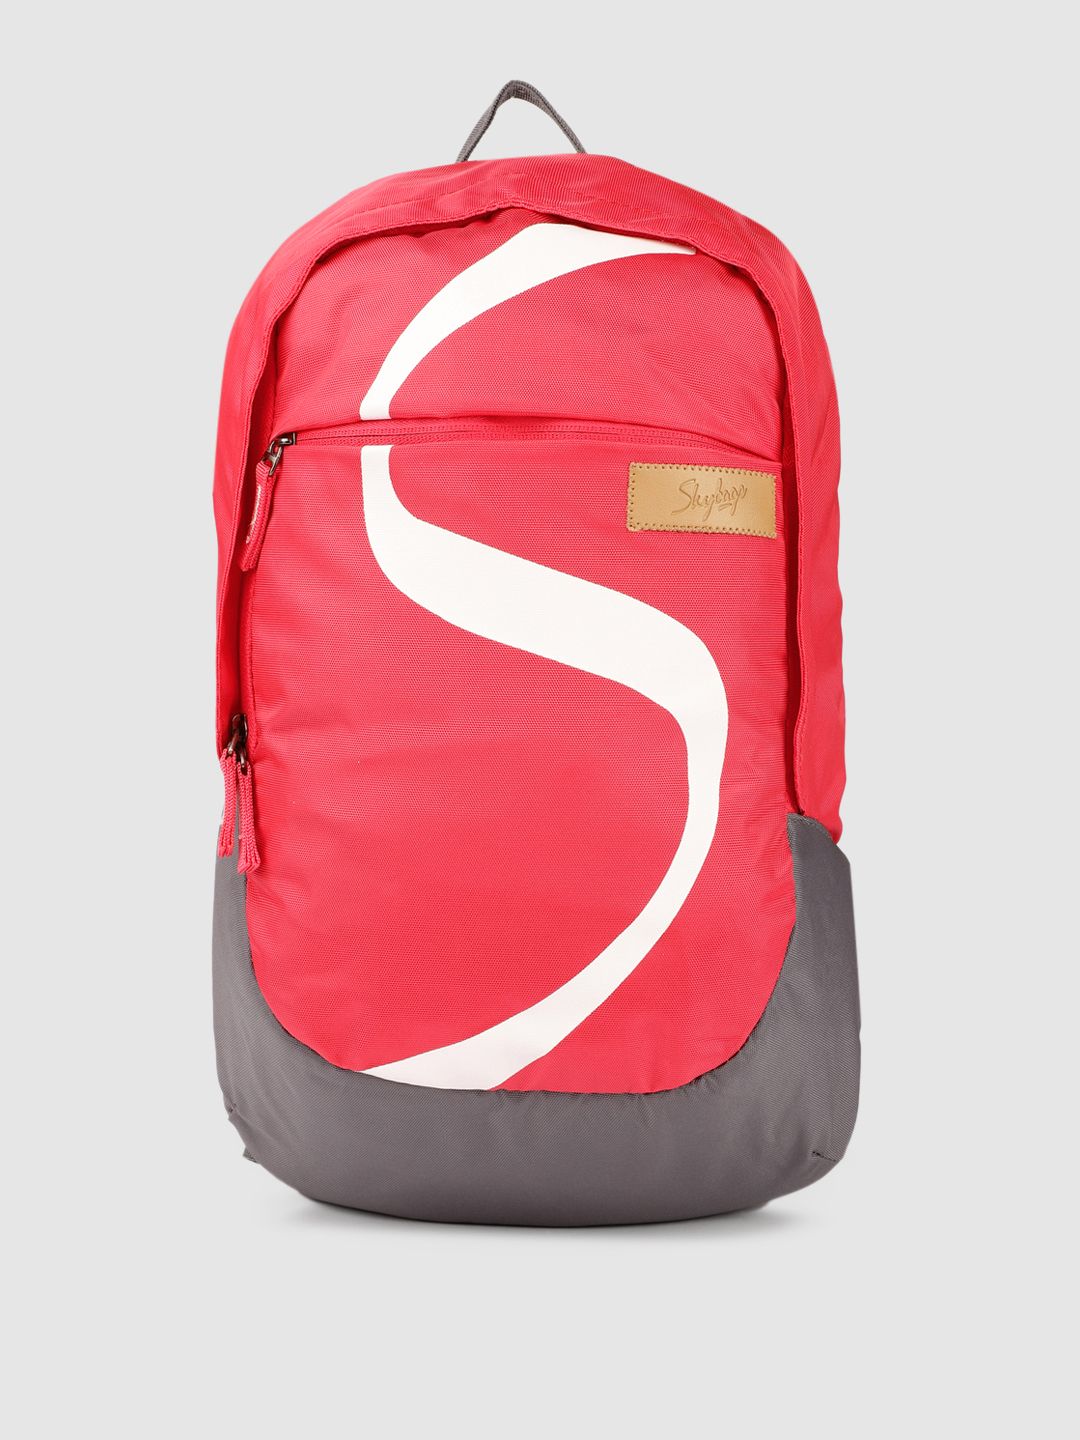 Skybags Unisex Pink Brand Logo Backpack Price in India